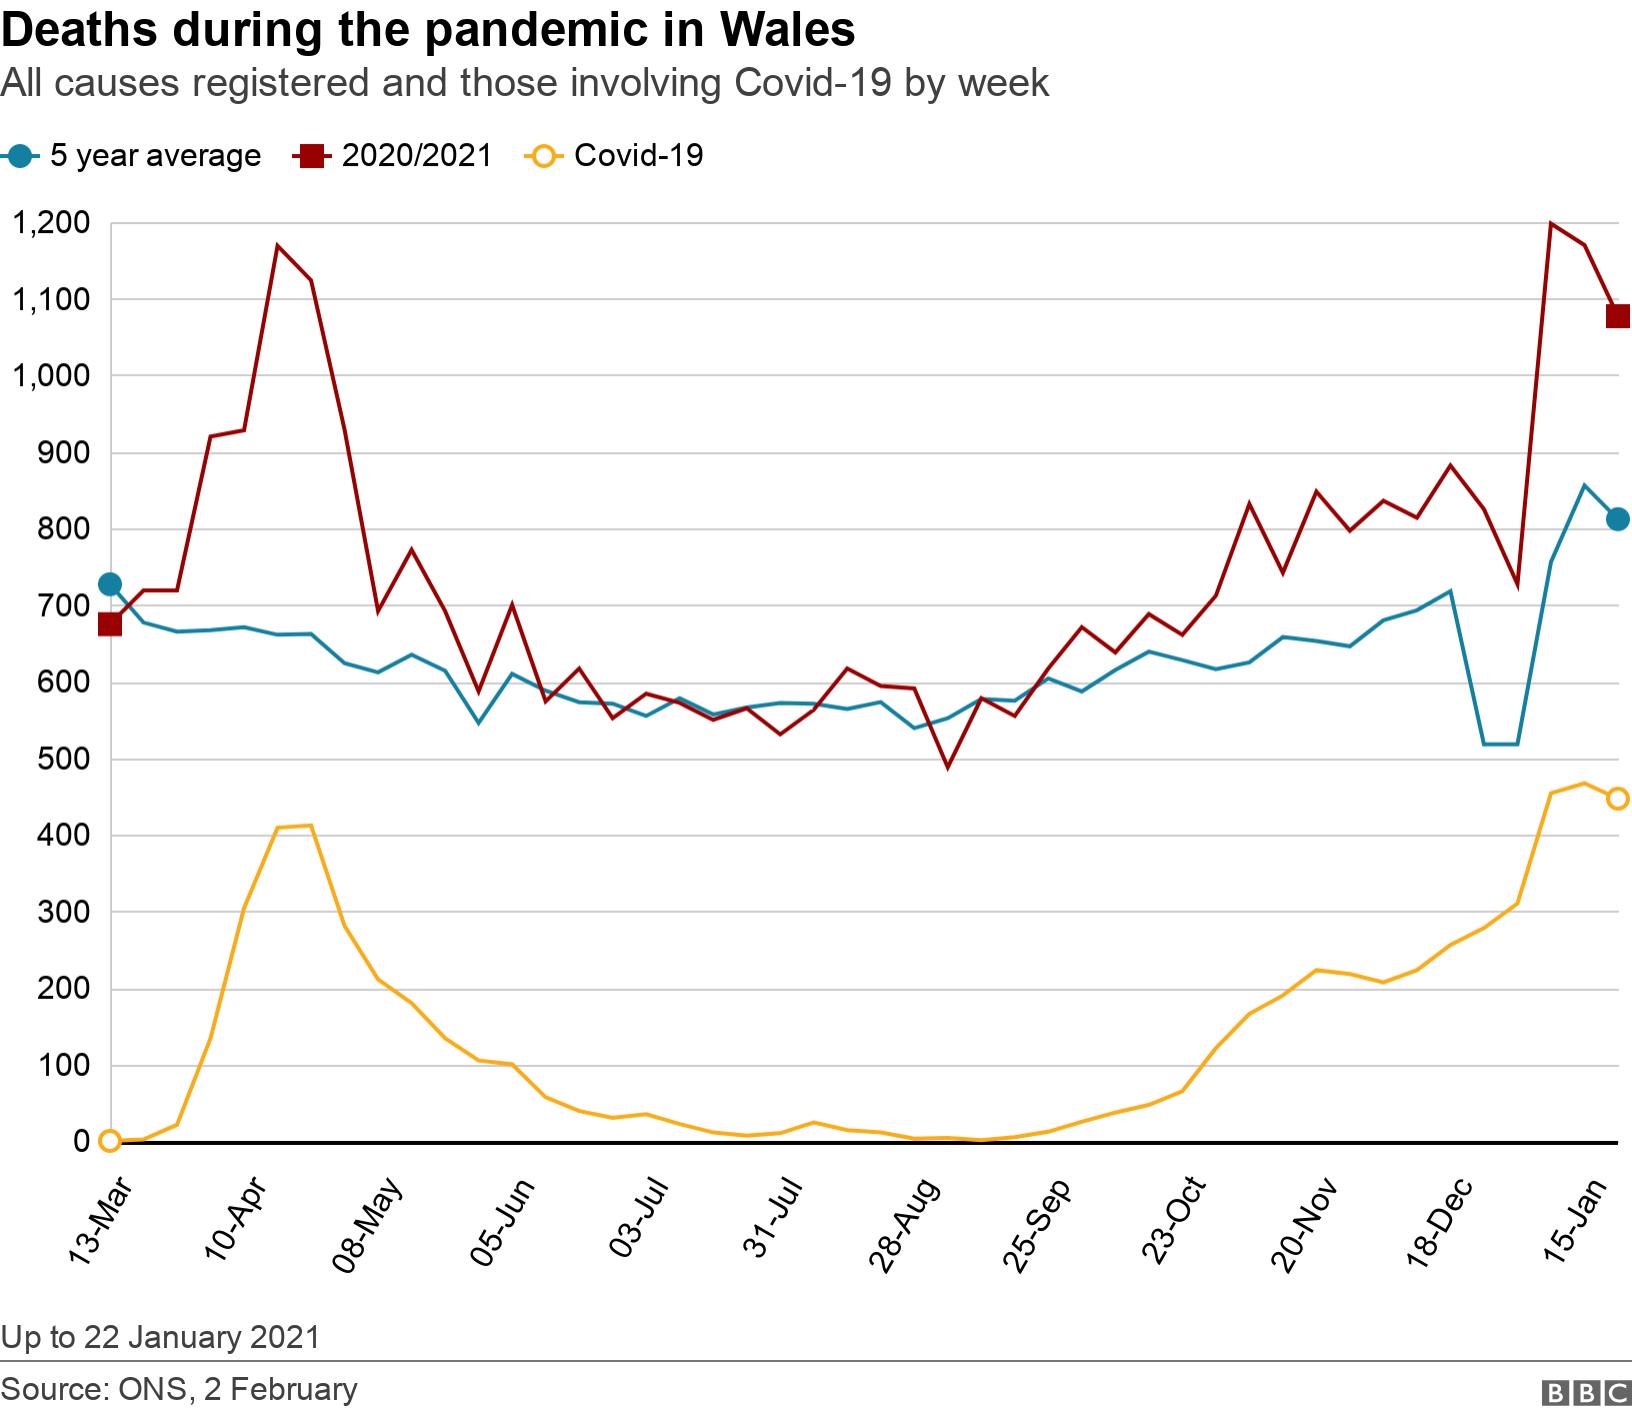 Deaths during the pandemic in Wales. All causes registered and those involving Covid-19 by week.  Up to 22 January 2021.